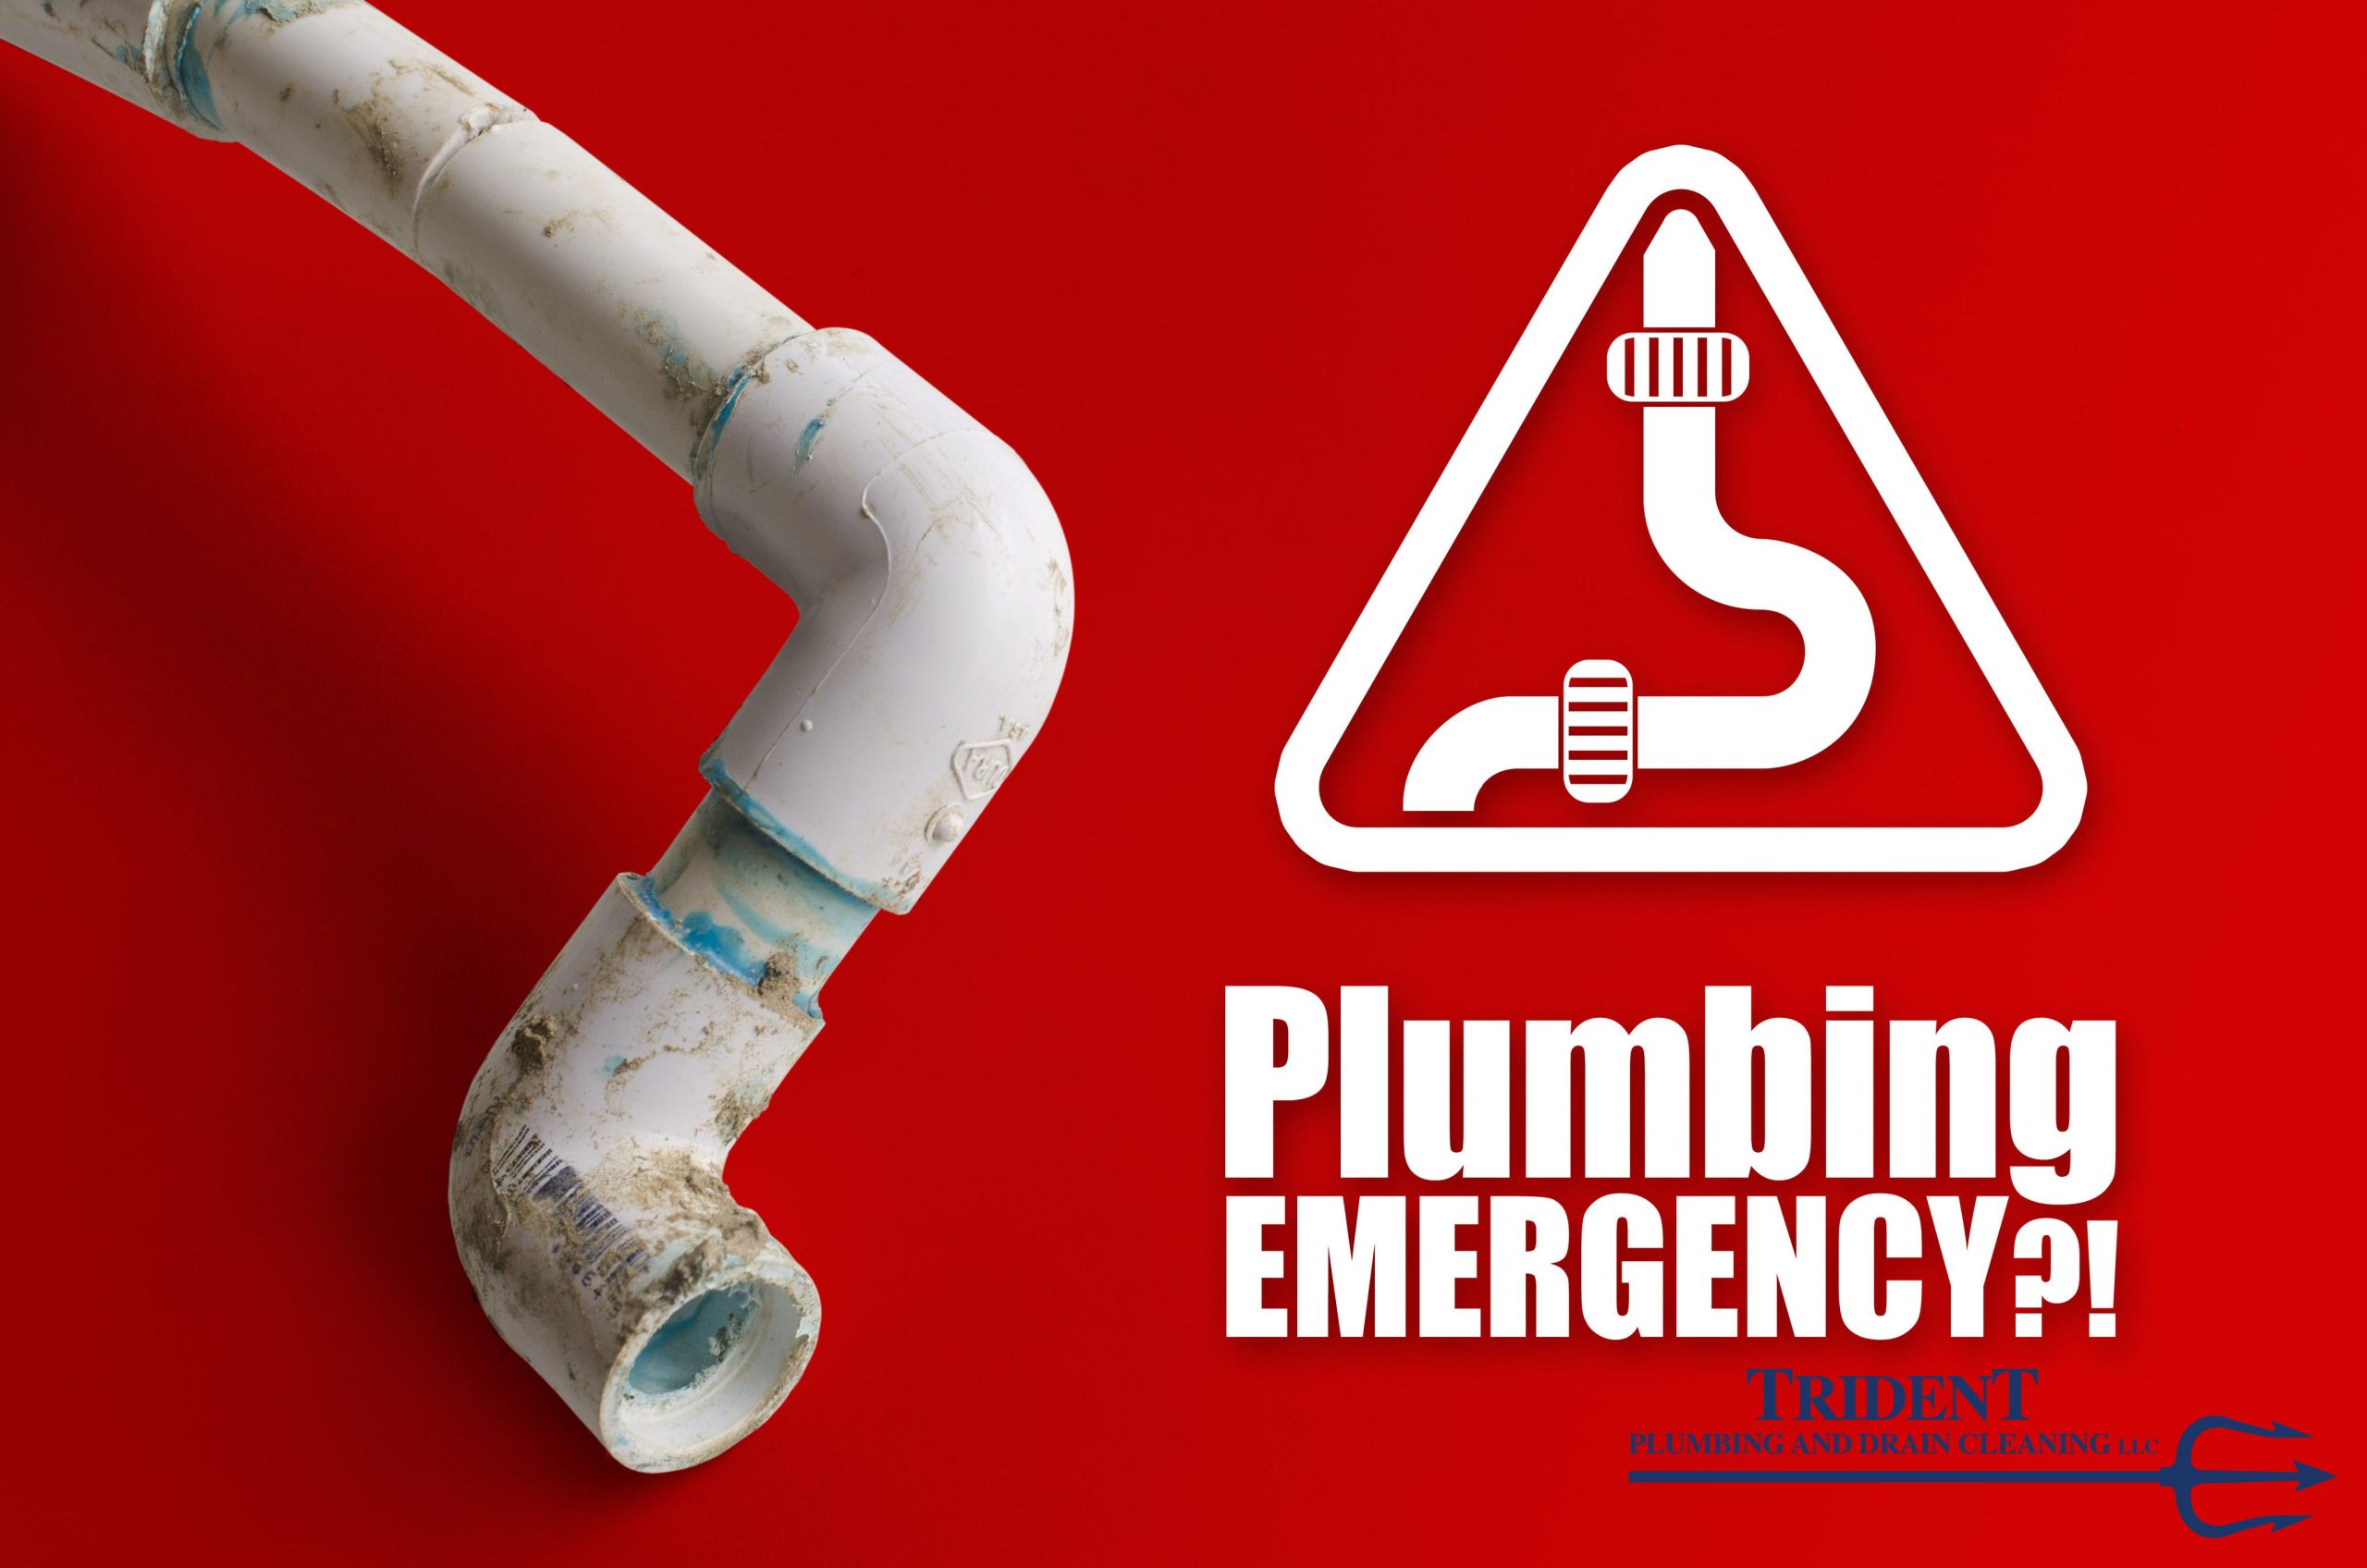 Get Peace Of Mind With Our Emergency Plumbing Service